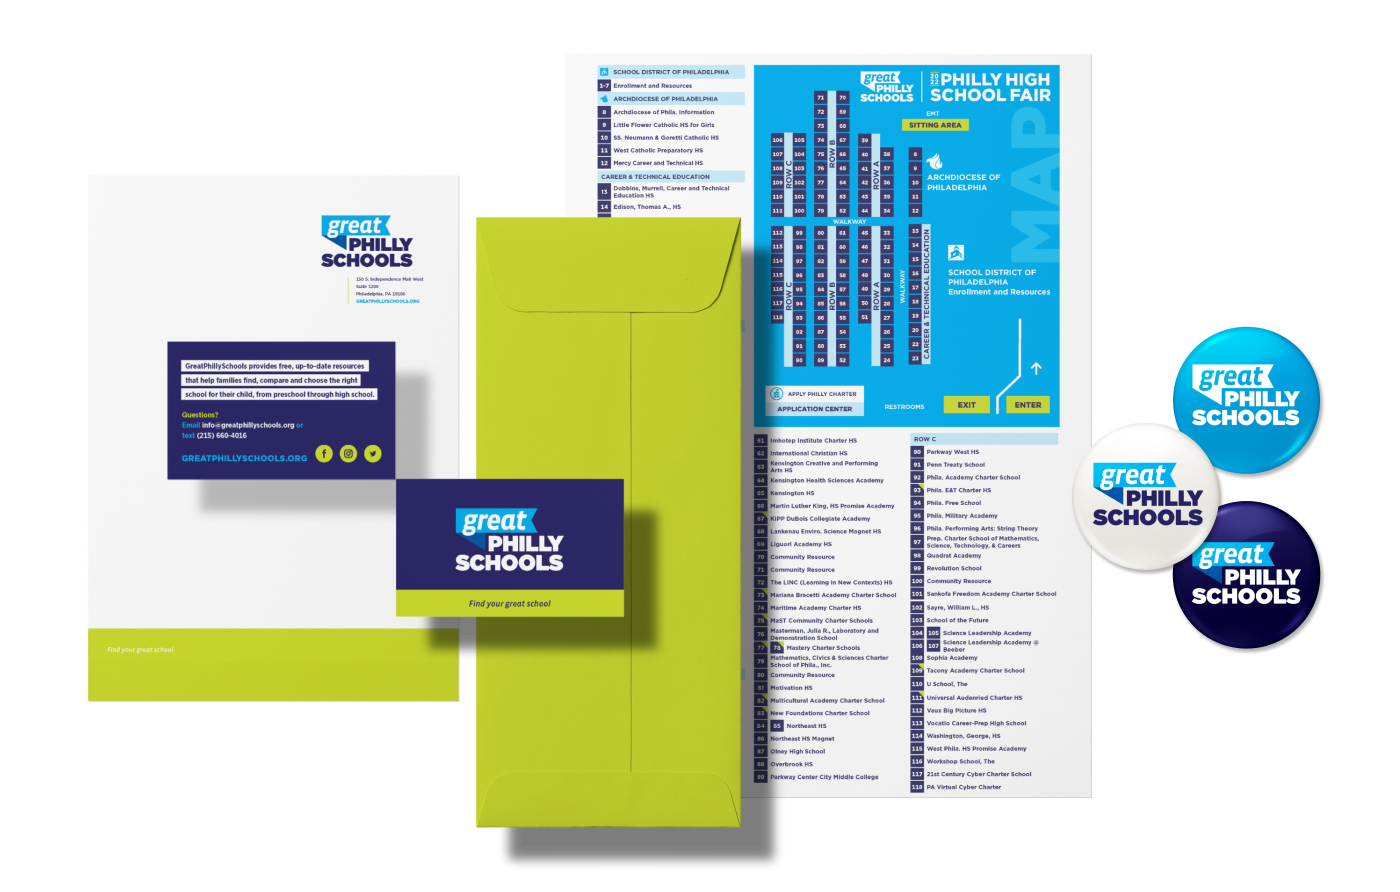 A collection of business collateral featuring business cards, stationery, informational flyers, and buttons with the new branding for GreatPhillySchools